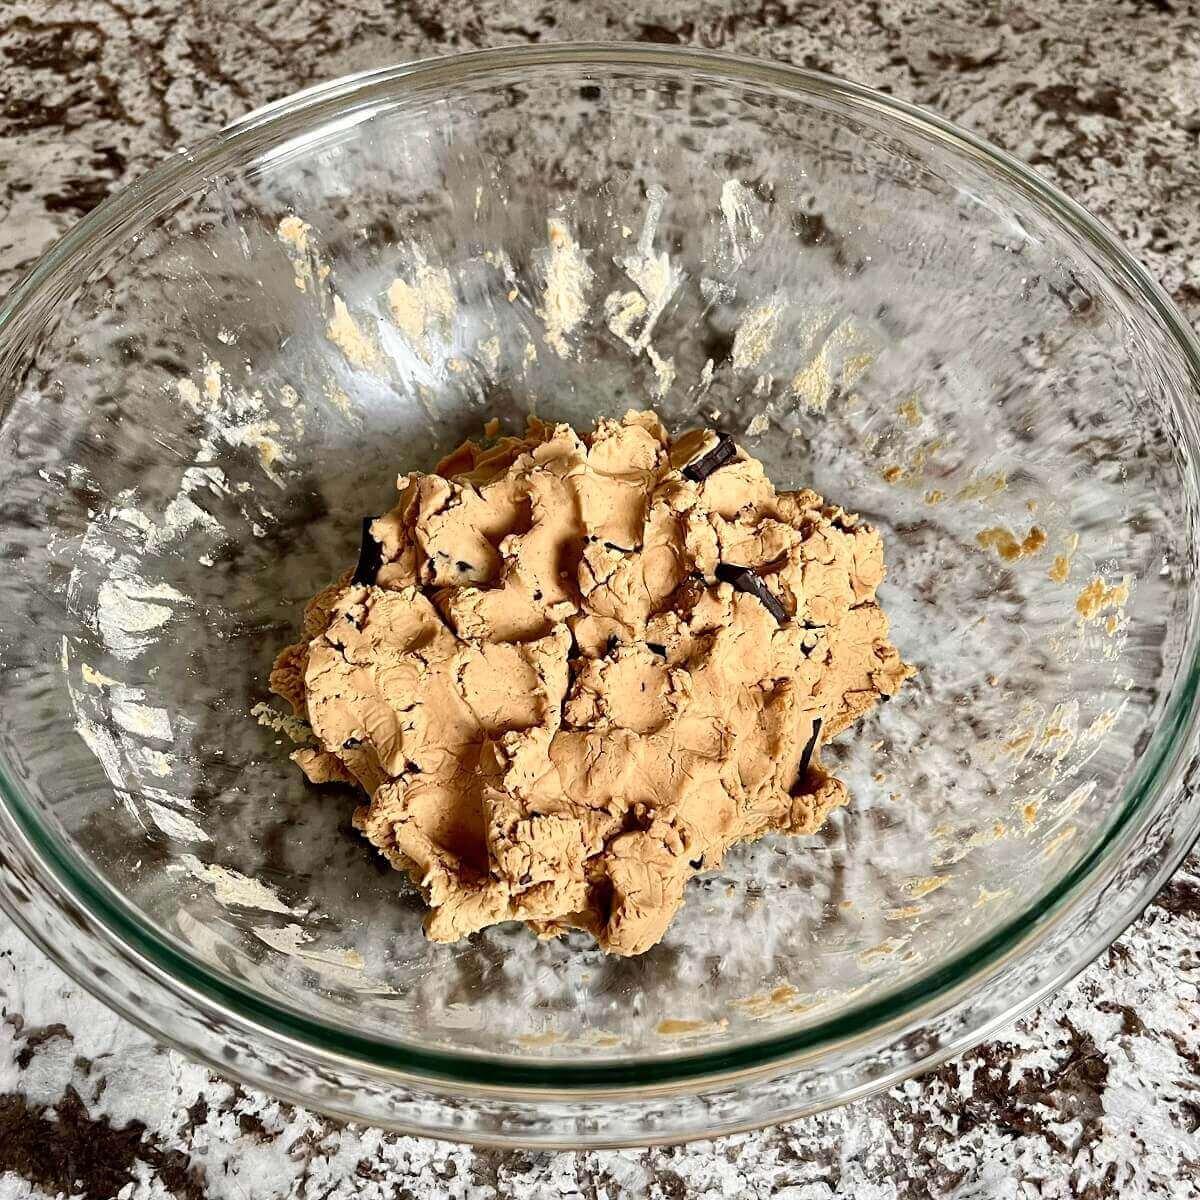 Pea protein cookie dough in a glass bowl.